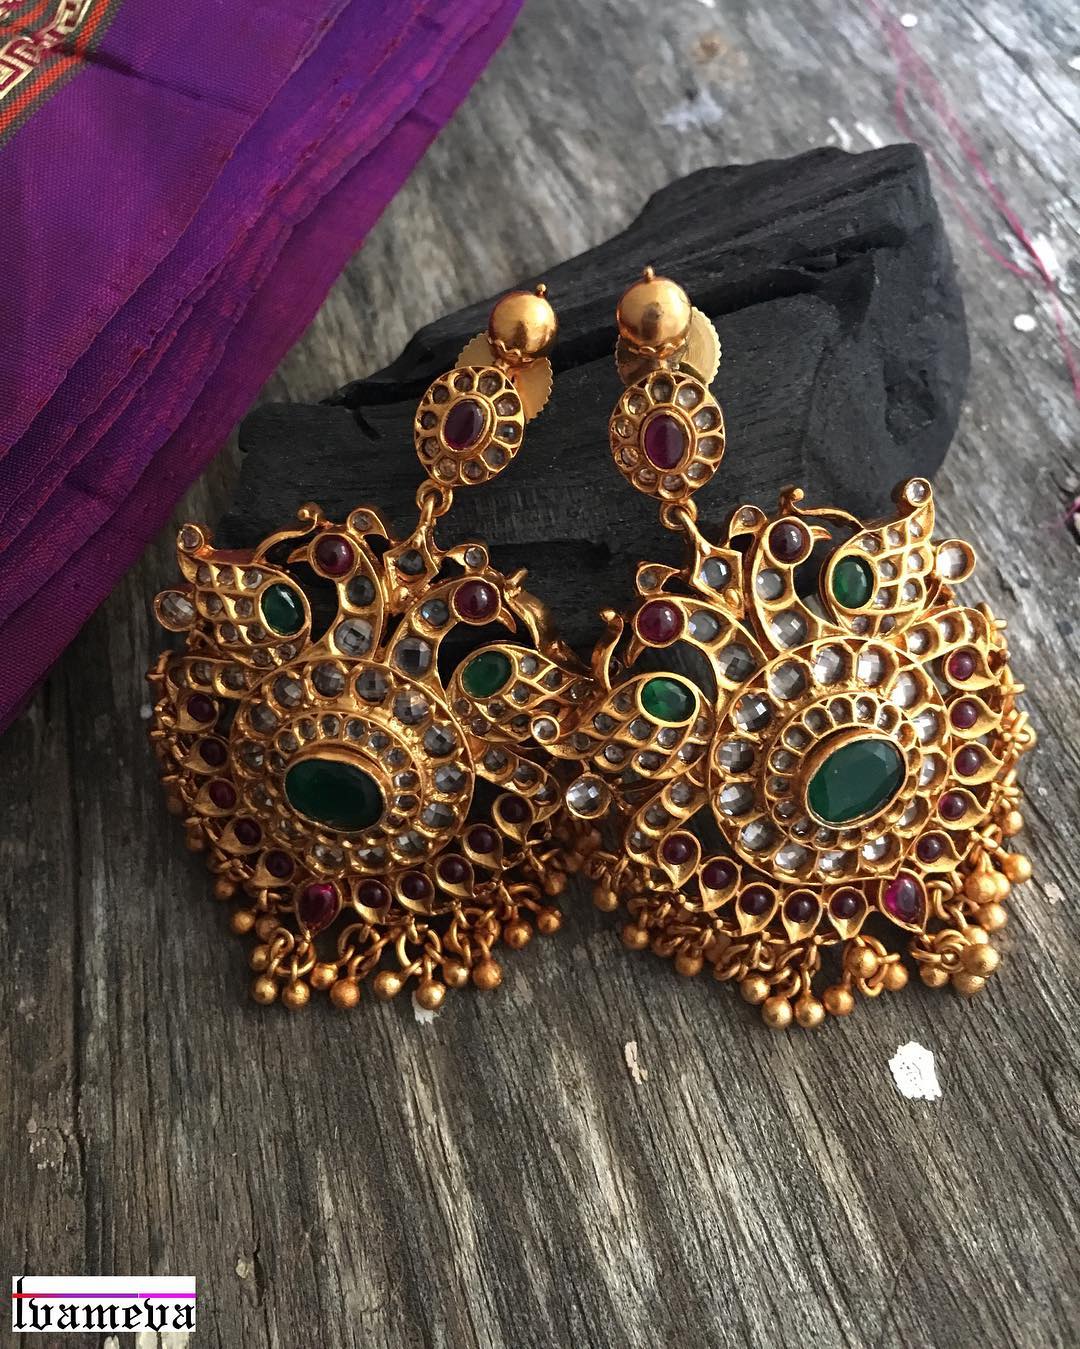 Beautiful South Indian Style Earrings